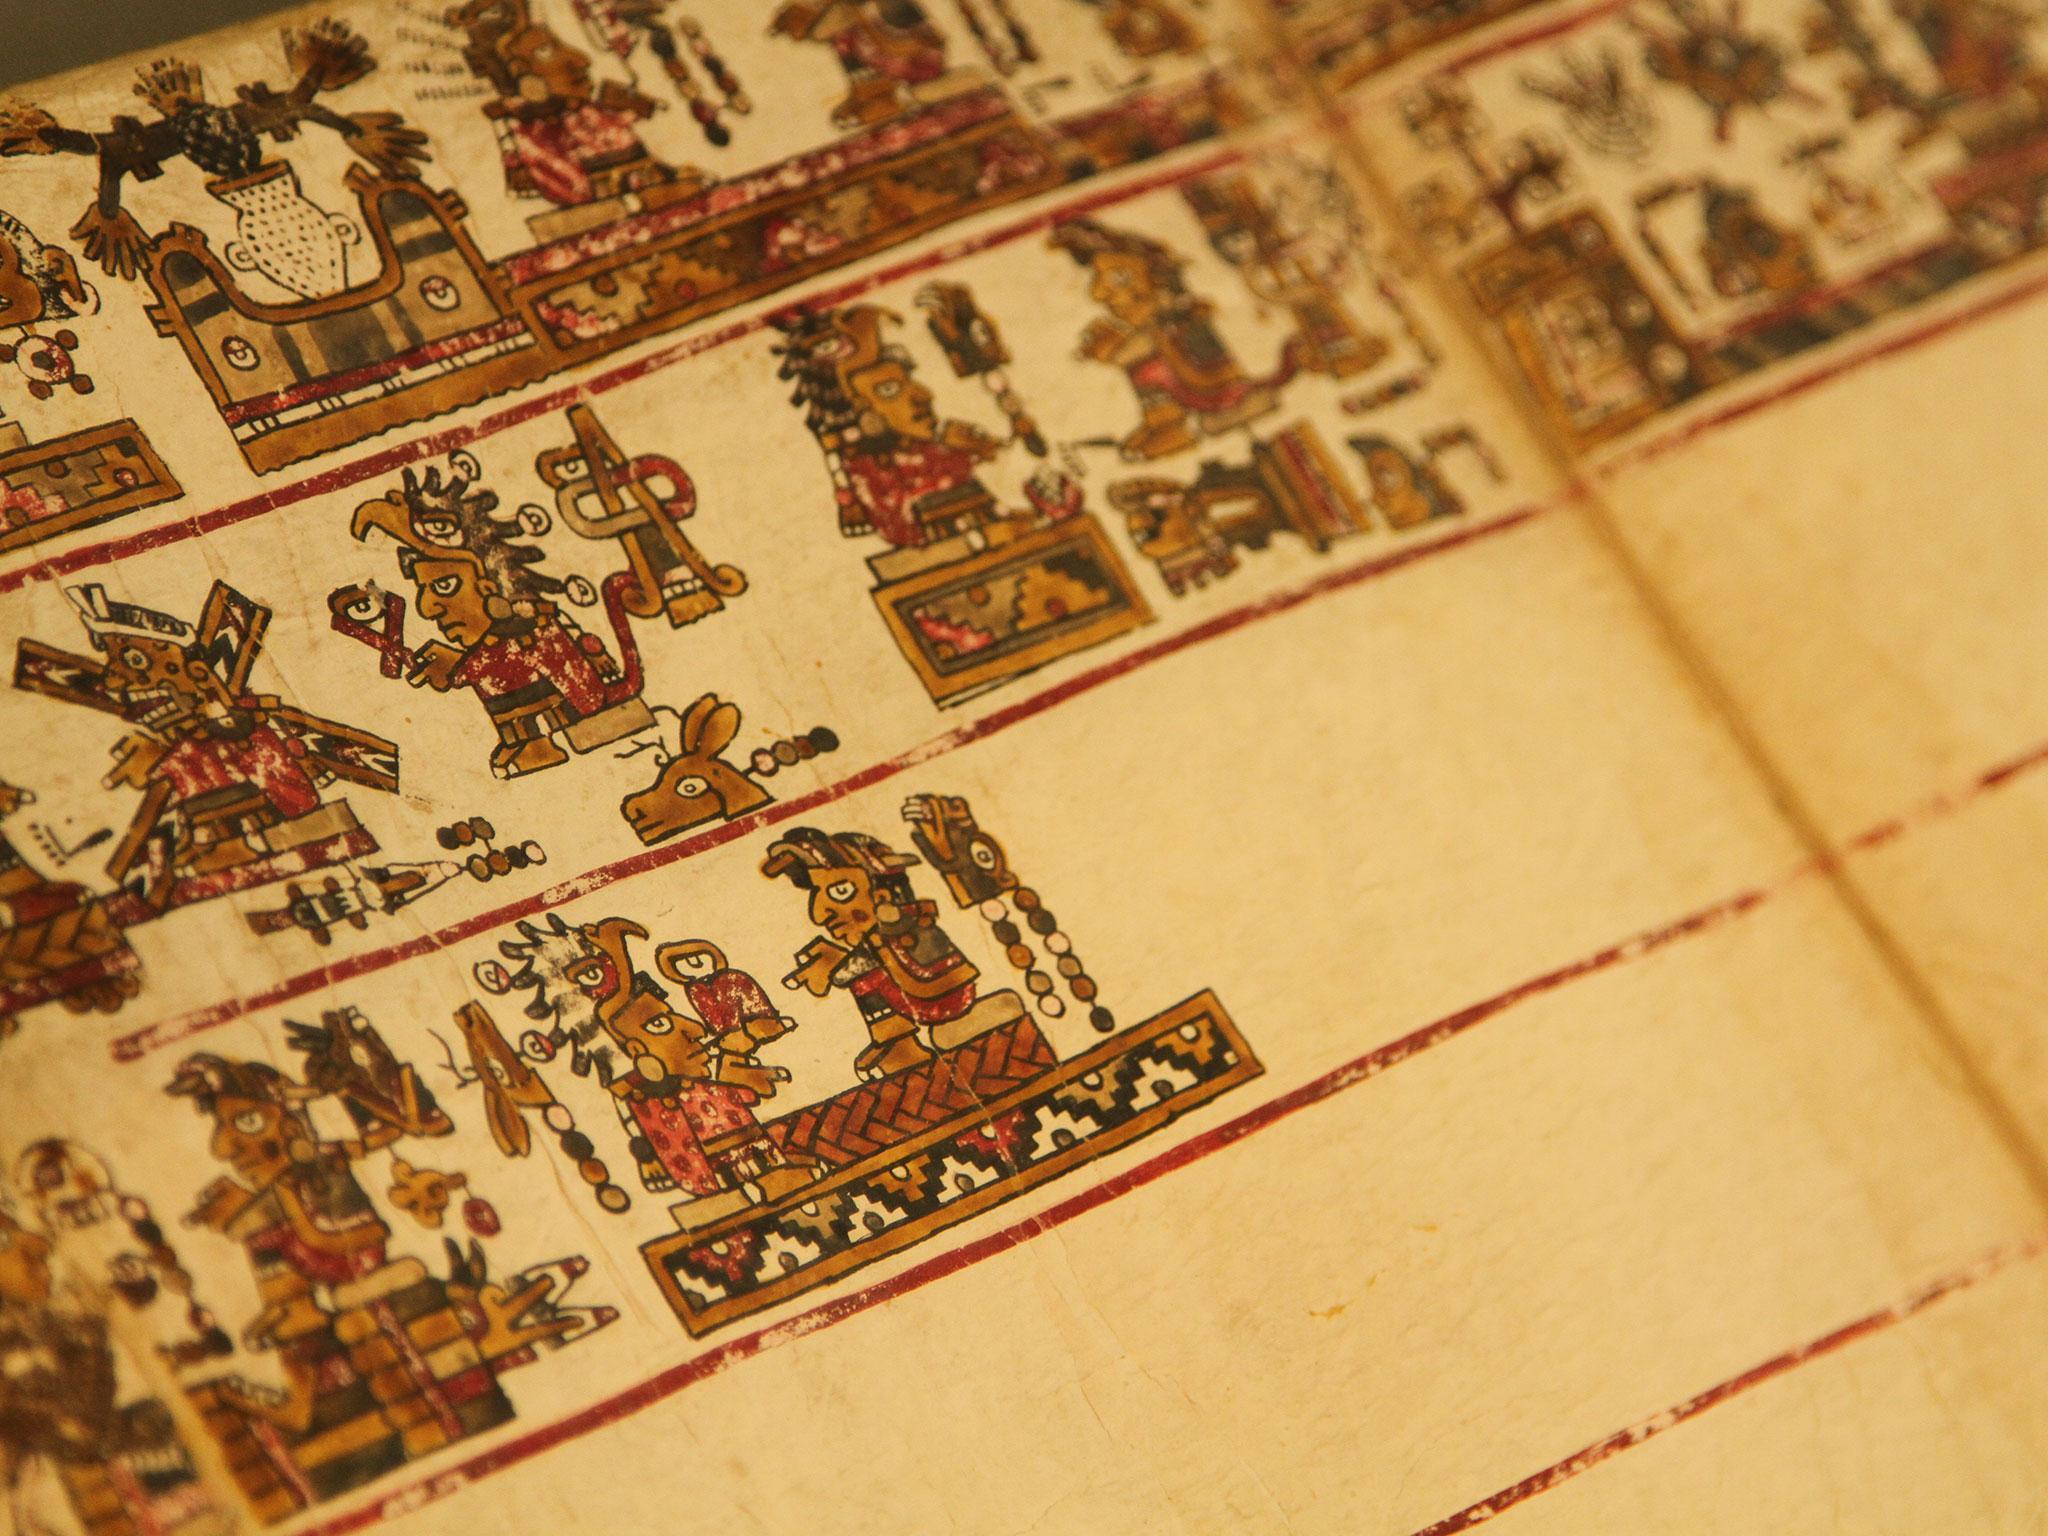 The front of Codex Selden, showing the known pictographic scenes that are visible to the naked eye. Beneath its pages, scientists have discovered hidden imagery